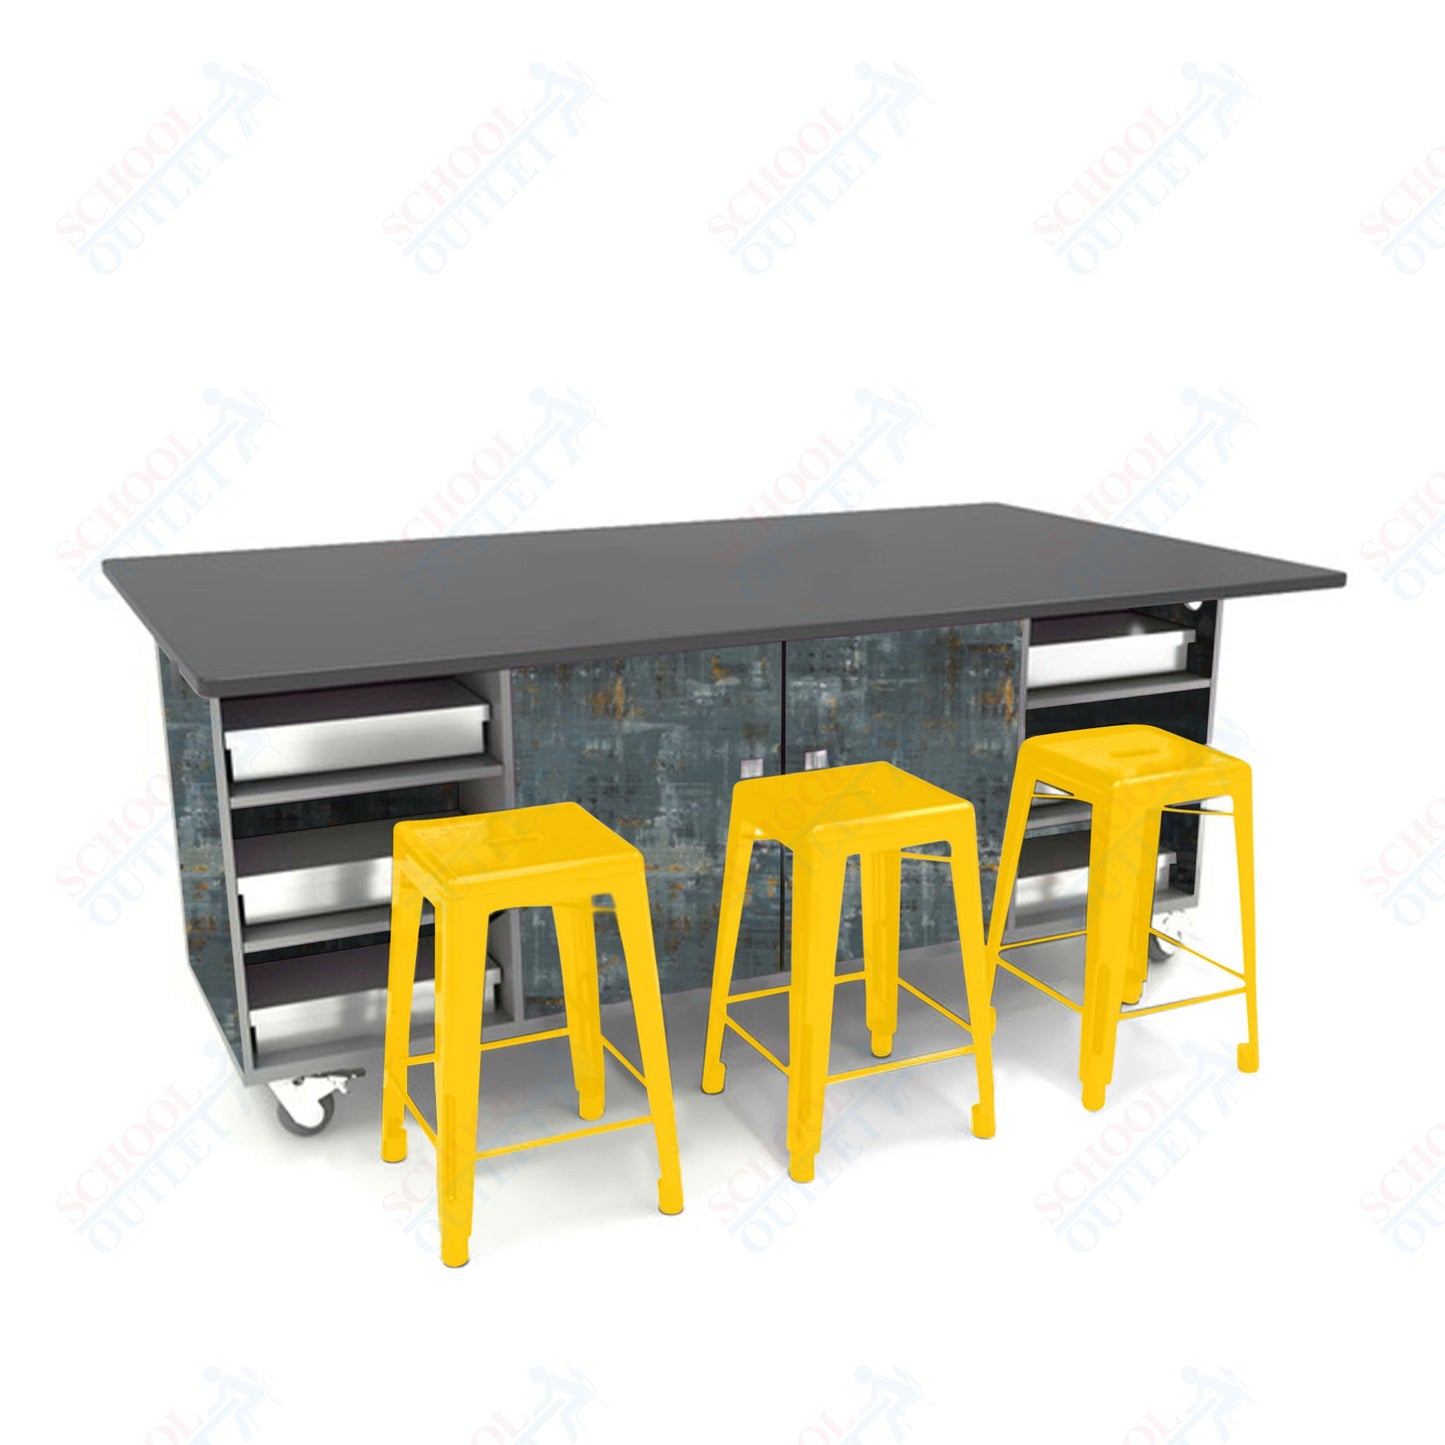 CEF ED Double Table 36"H Chemical Resistant Top, Laminate Base with  6 Stools, Storage bins, and Electrical Outlets Included.